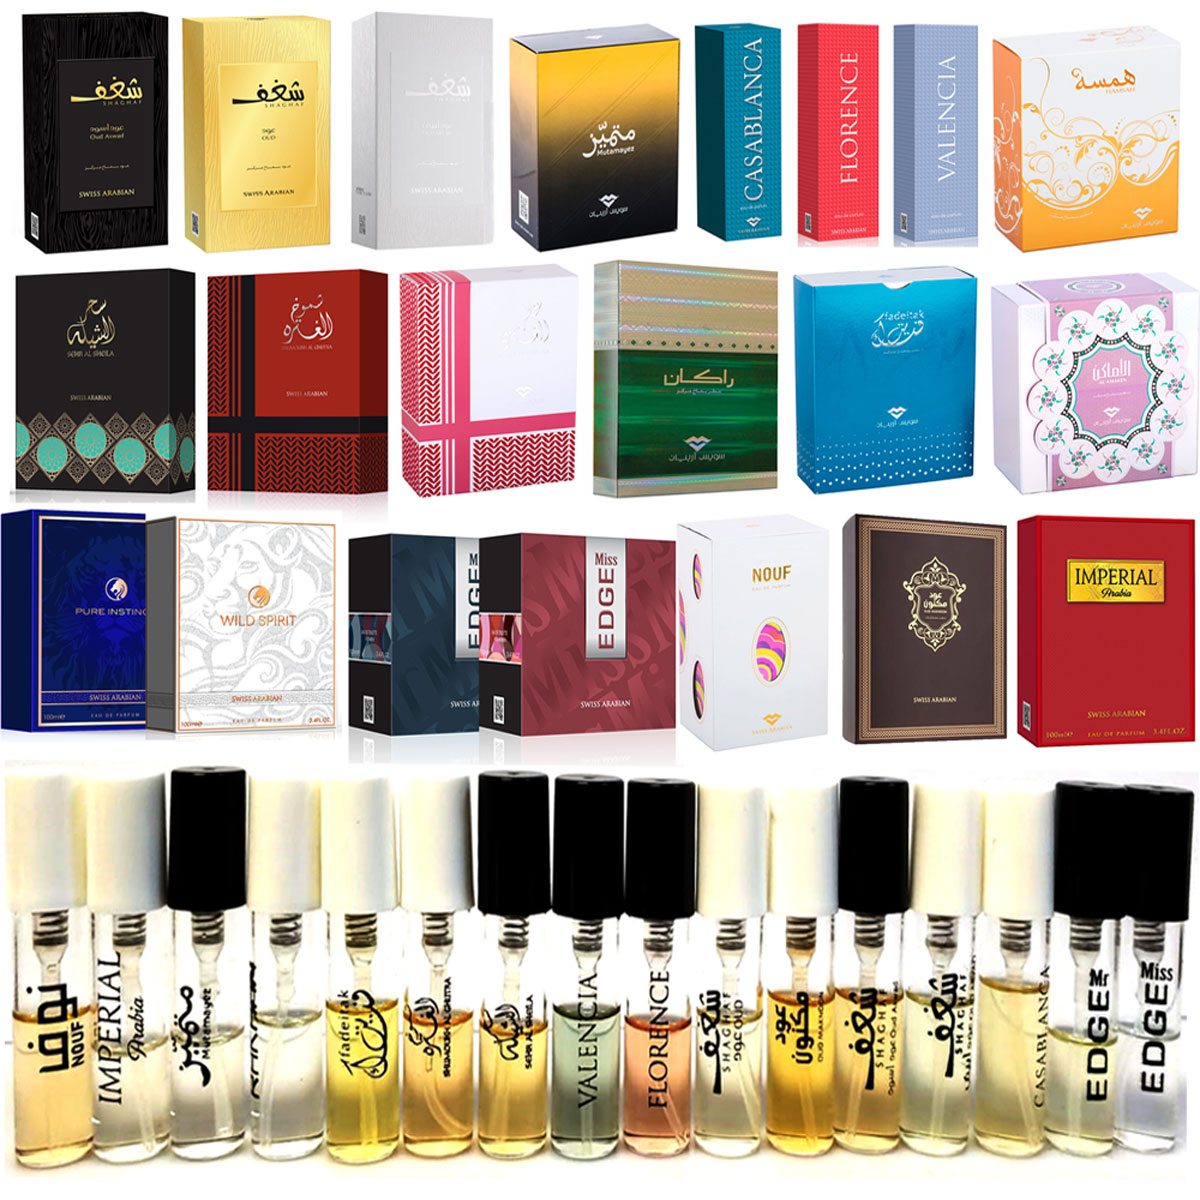 Perfume Samples, Colognes, and Fragrances